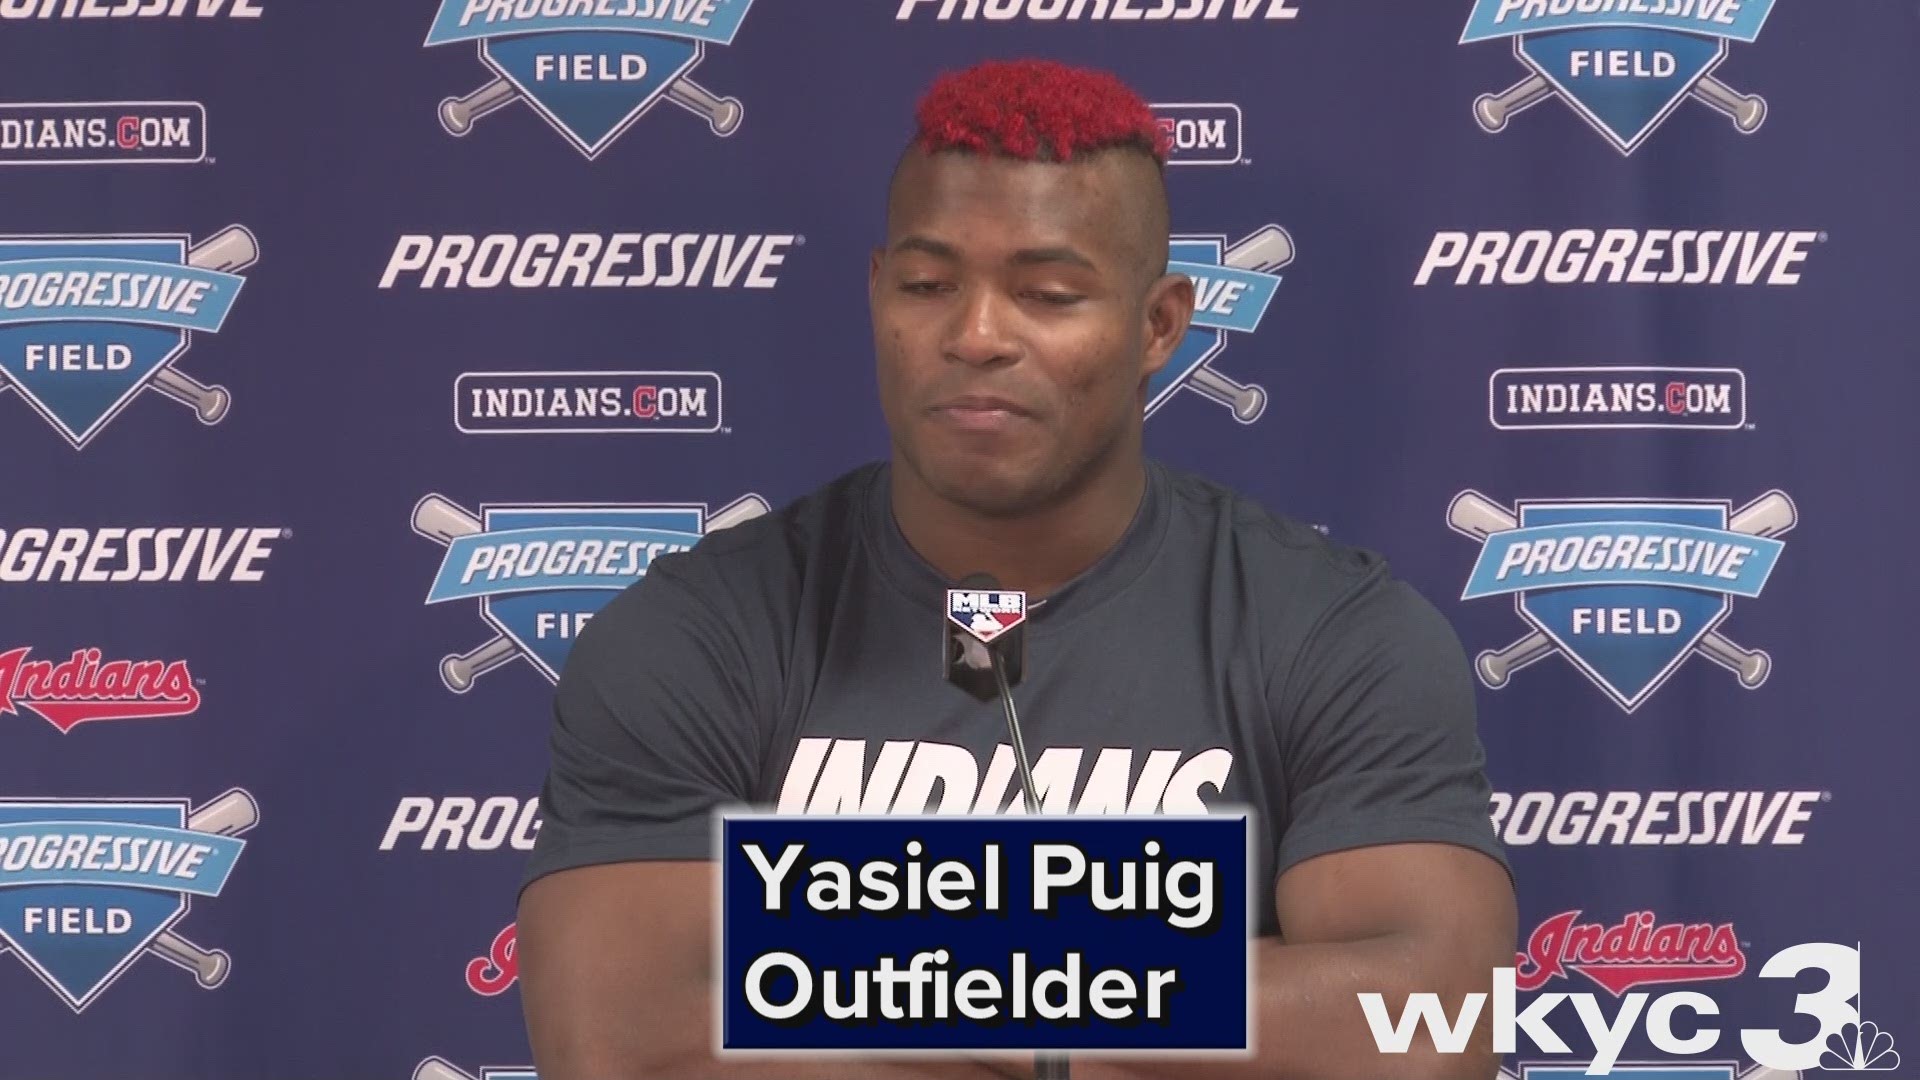 On Thursday, right fielder Yasiel Puig will make his debut as a member of the Cleveland Indians.